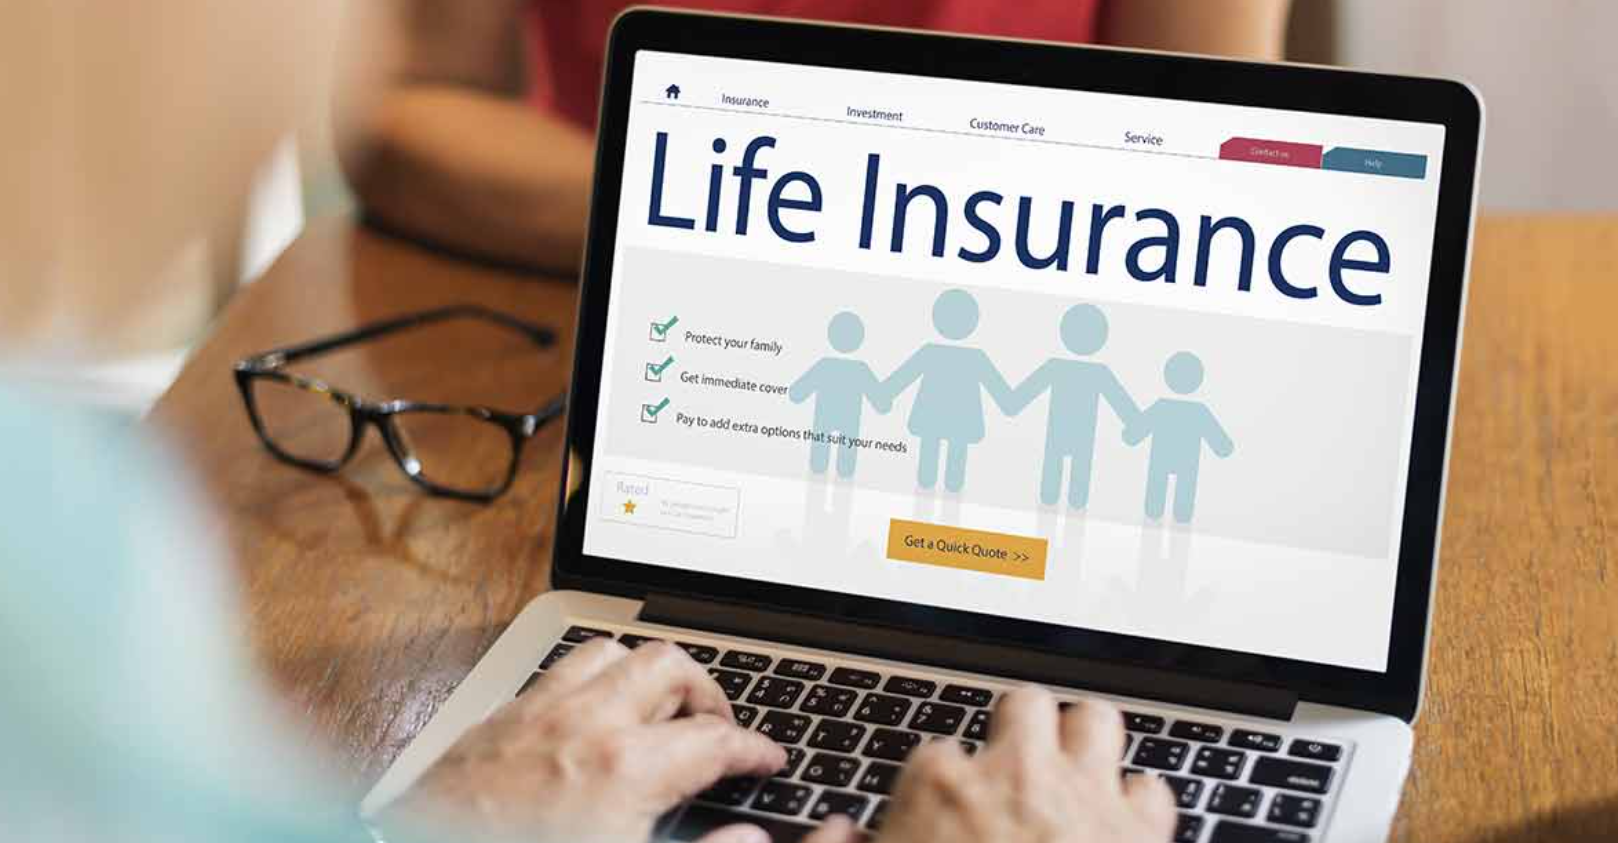 Top Affordable Life Insurance Providers: Comparing Rates And Coverage Options